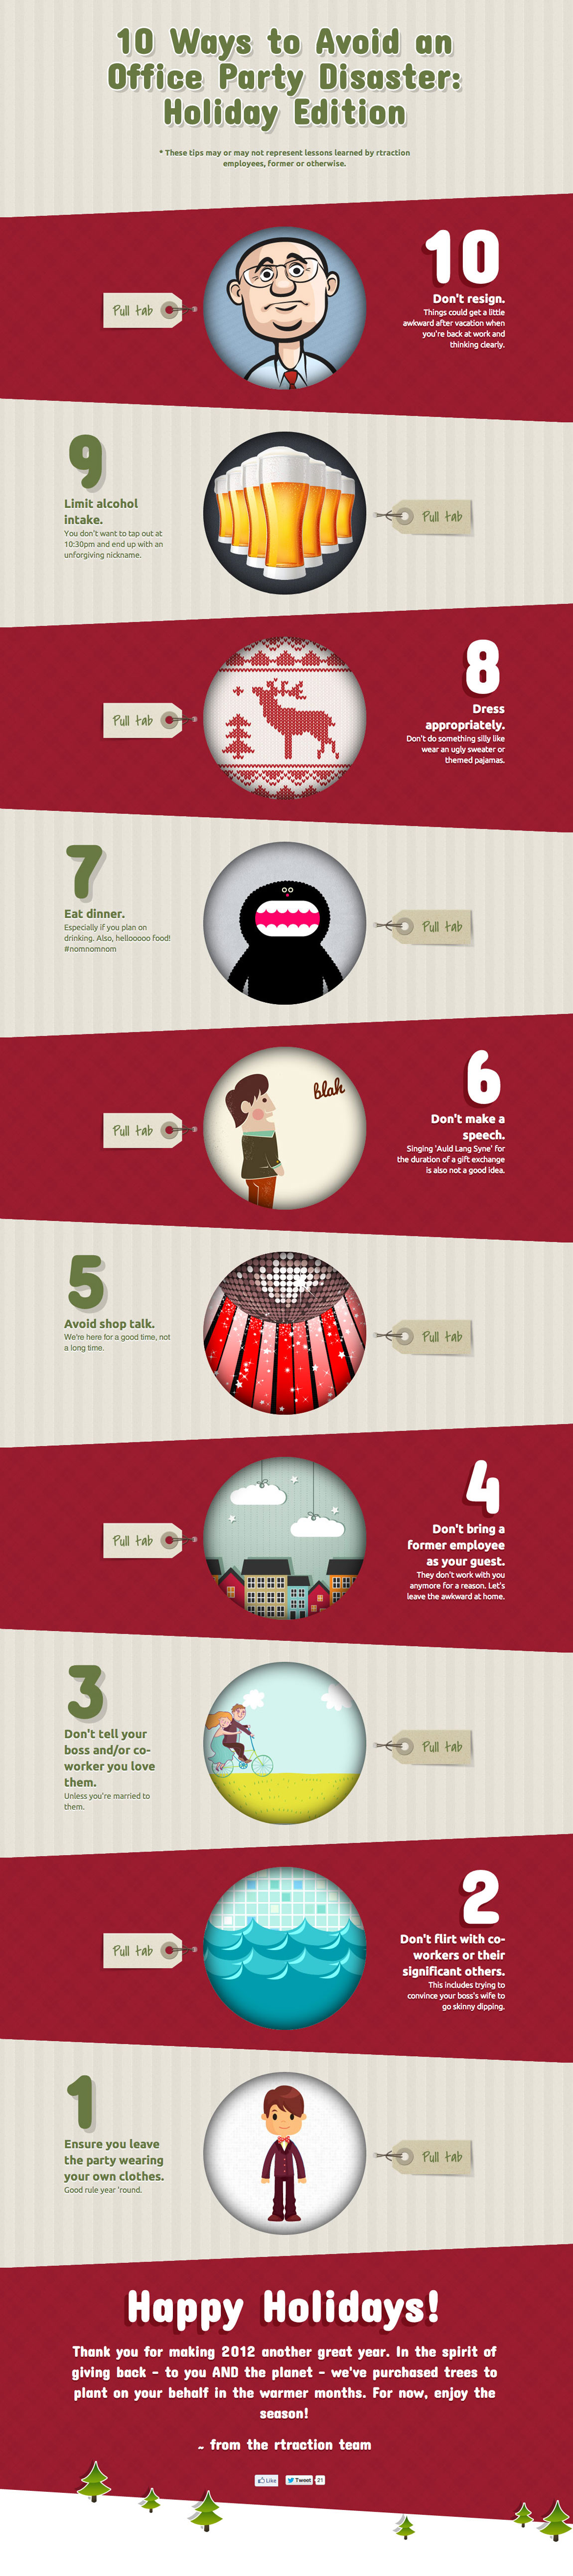 10 Ways to Avoid an Office Party Disaster: Holiday Edition Website Screenshot